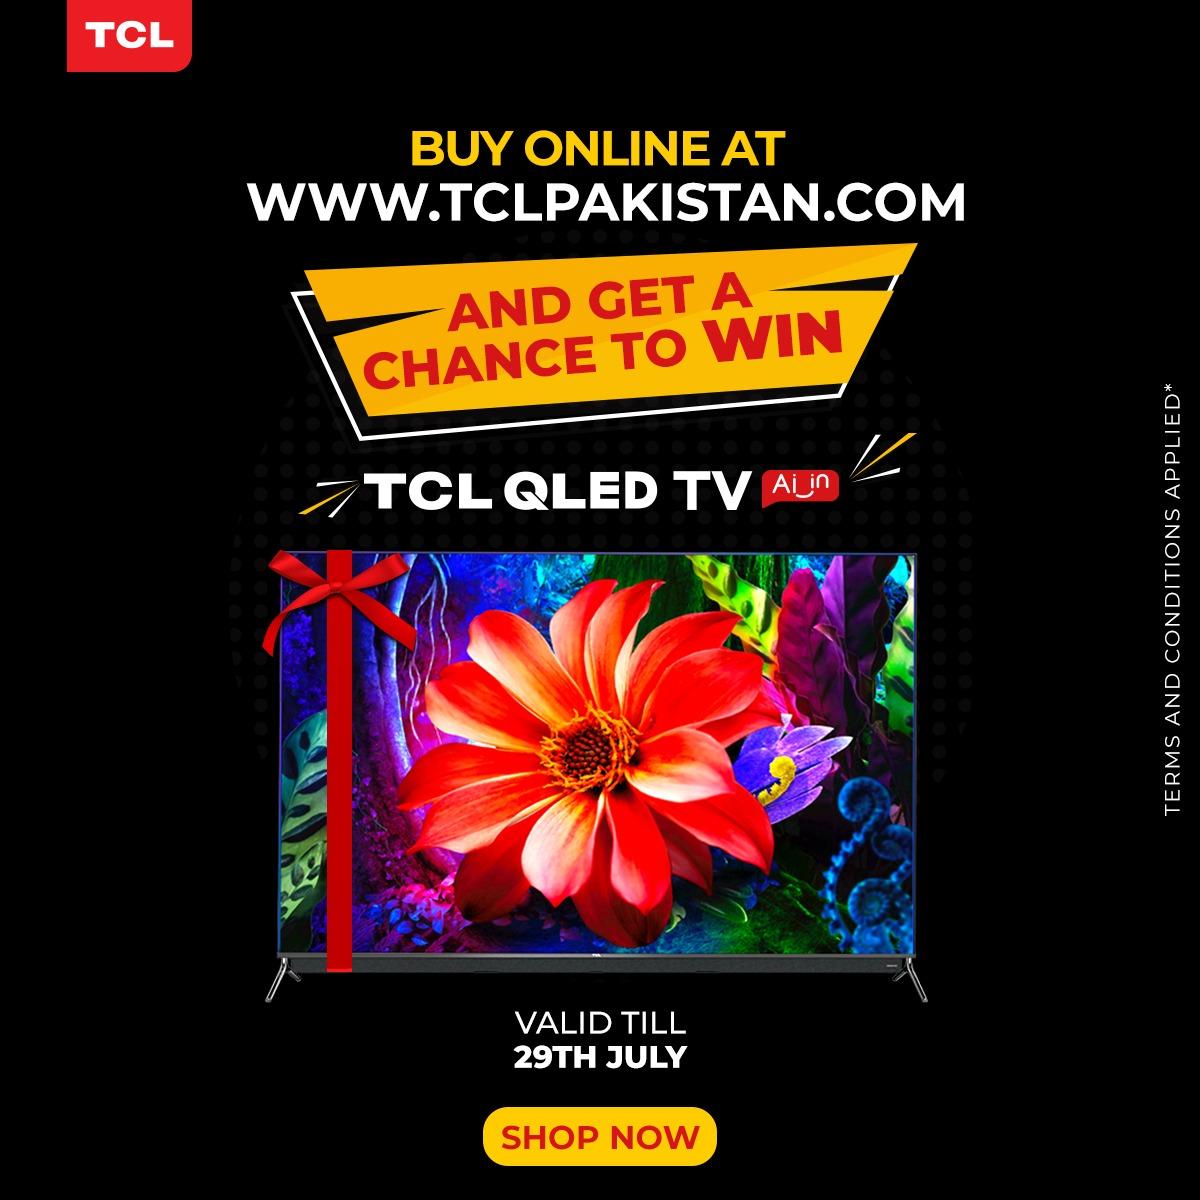 TCL Pakistan brings Bari Eid Bari Offer with exclusive discounts up to 20%